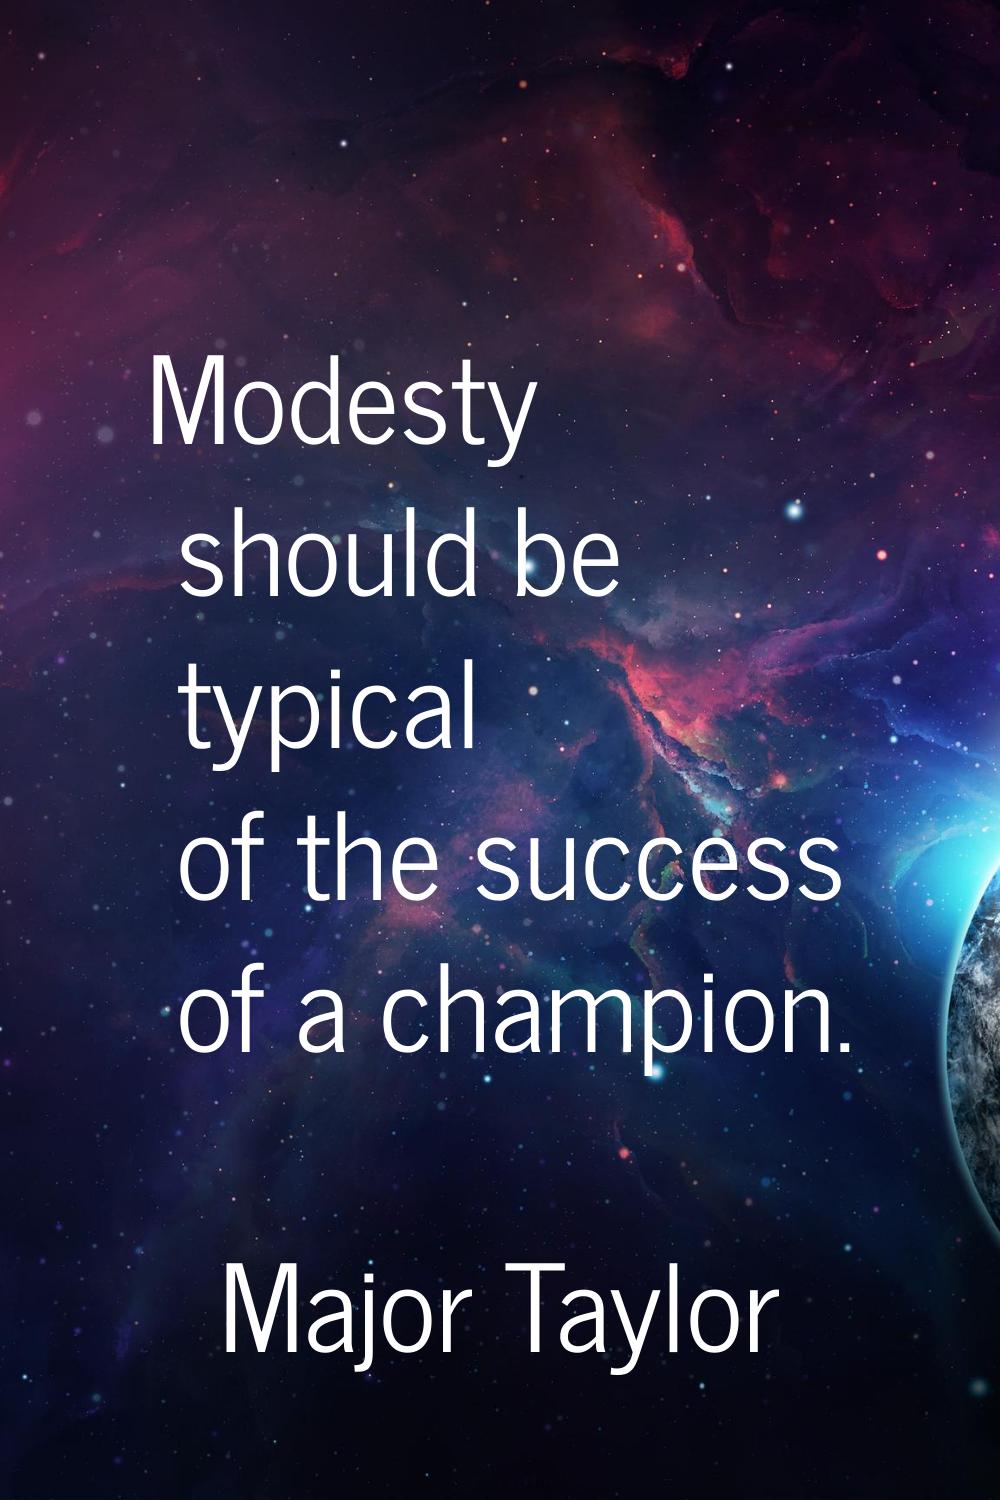 Modesty should be typical of the success of a champion.